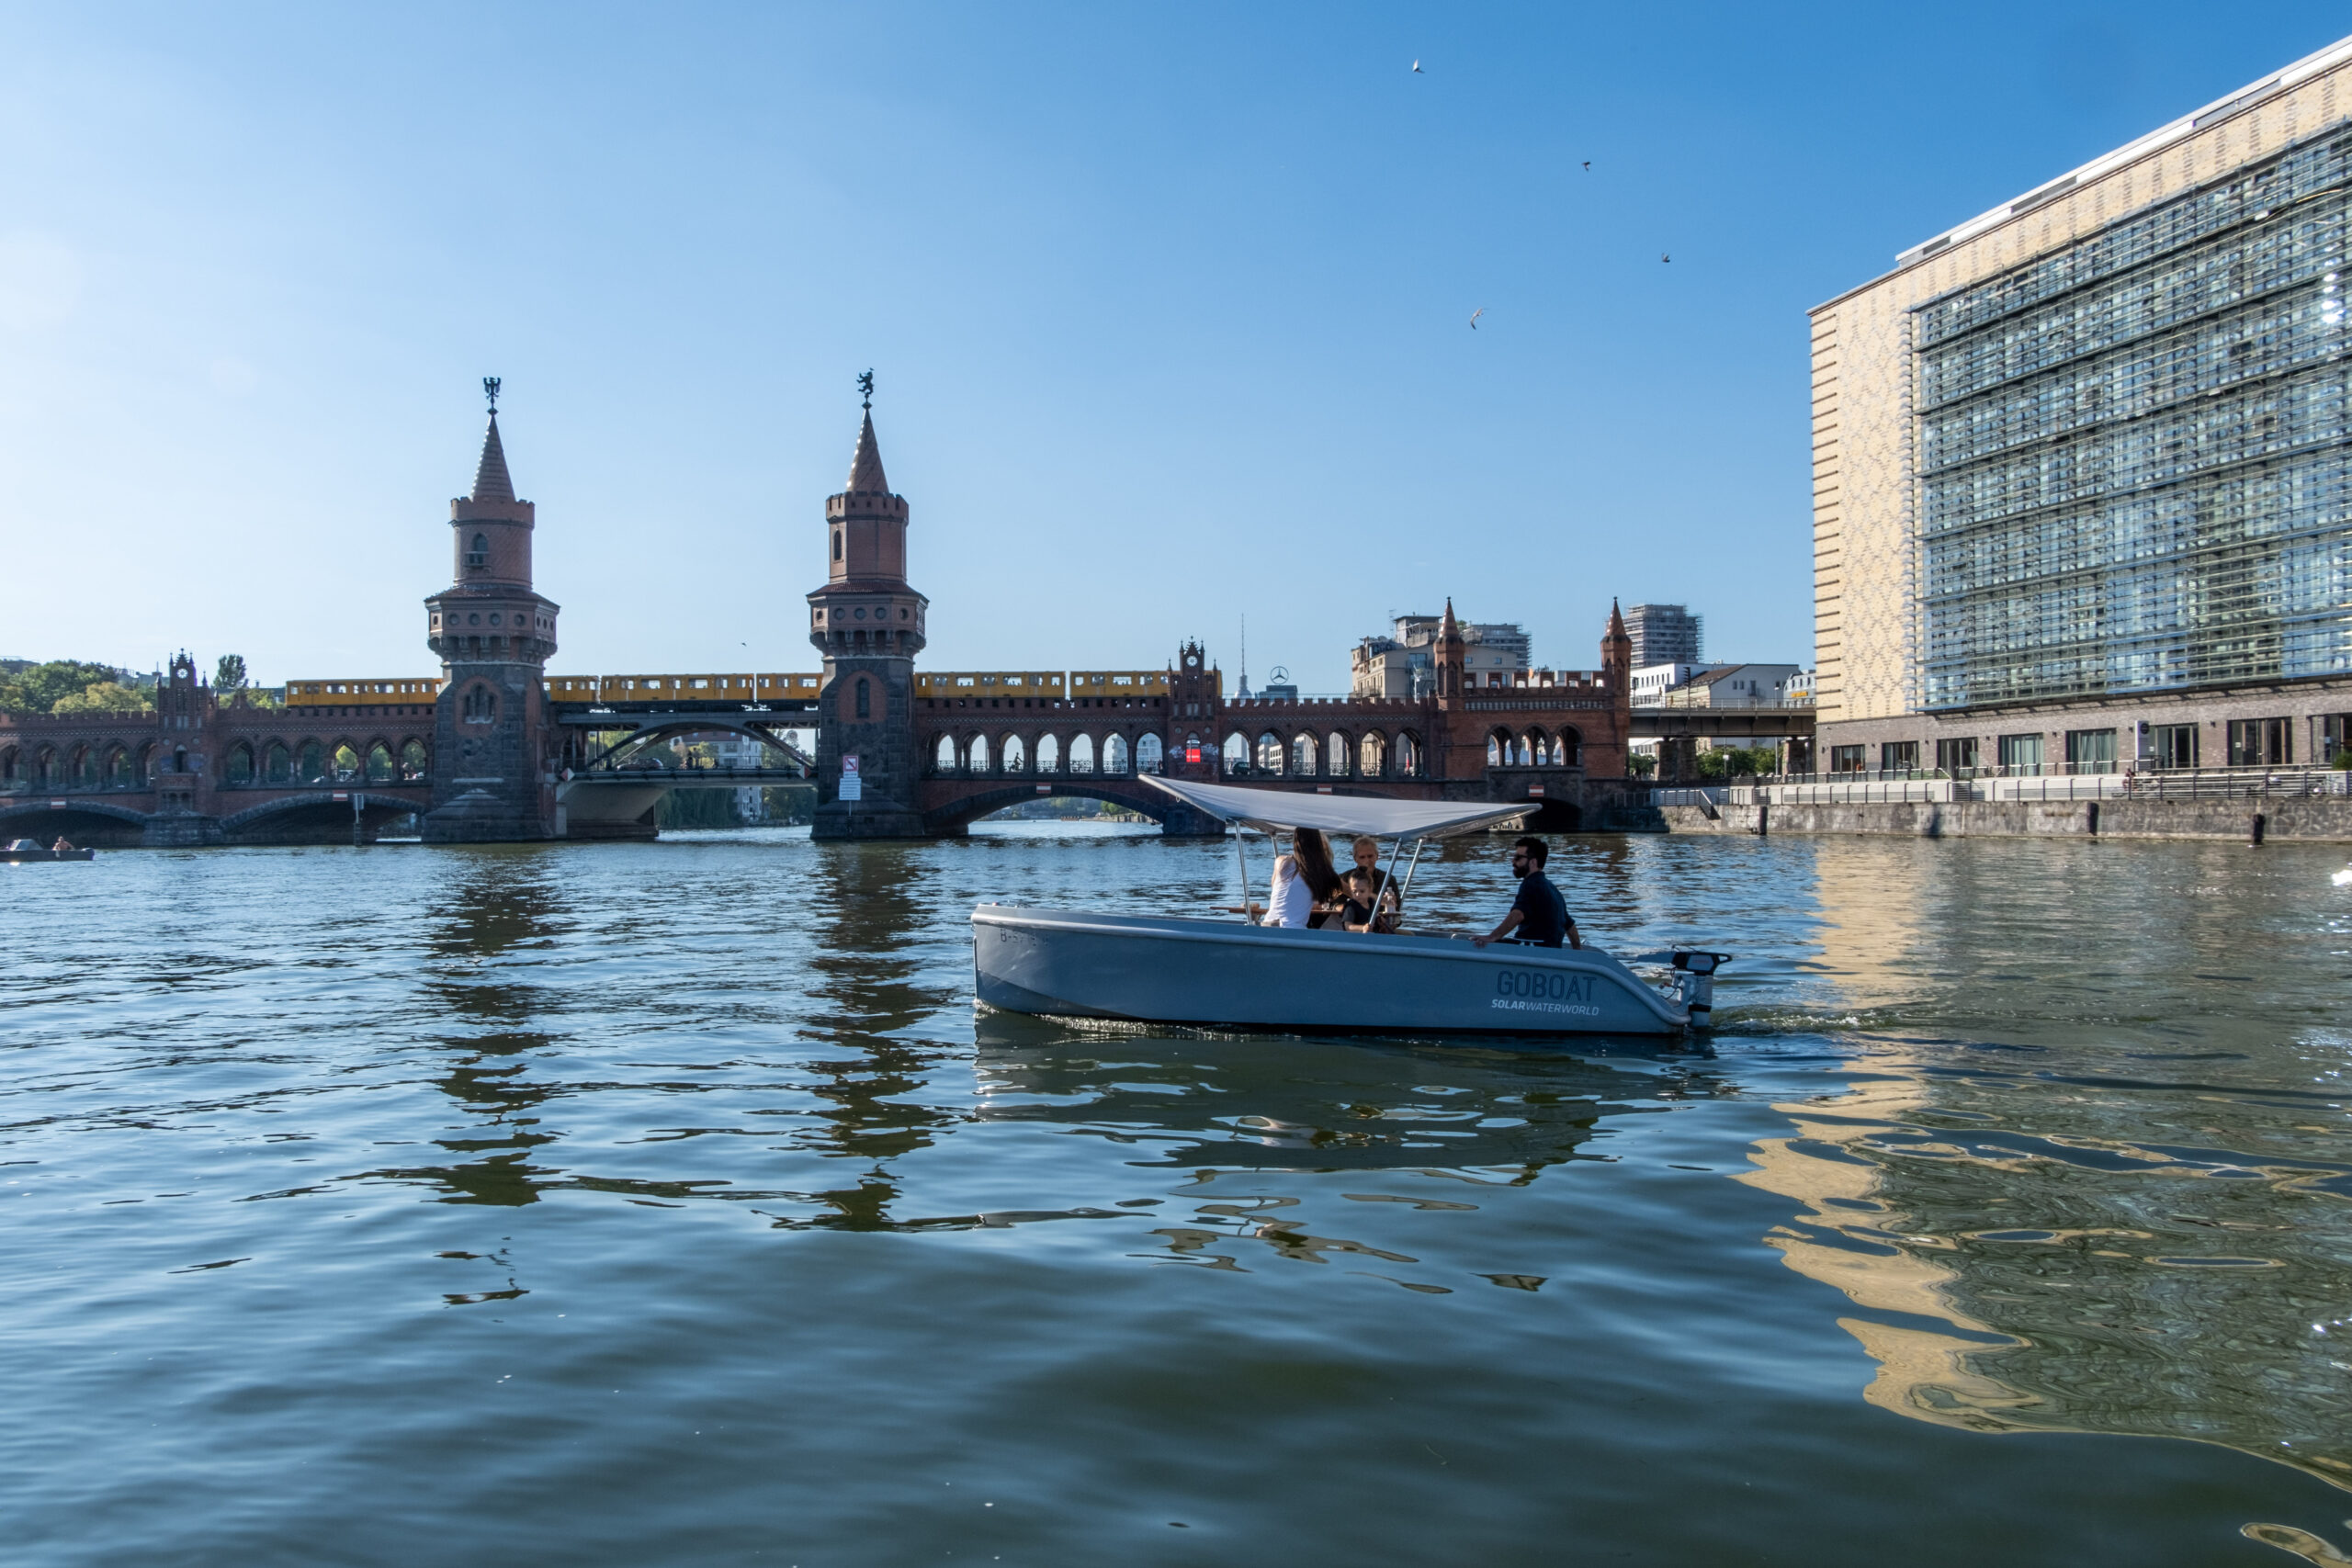 About GoBoat (company, culture, customer experience) - GoBoat Germany